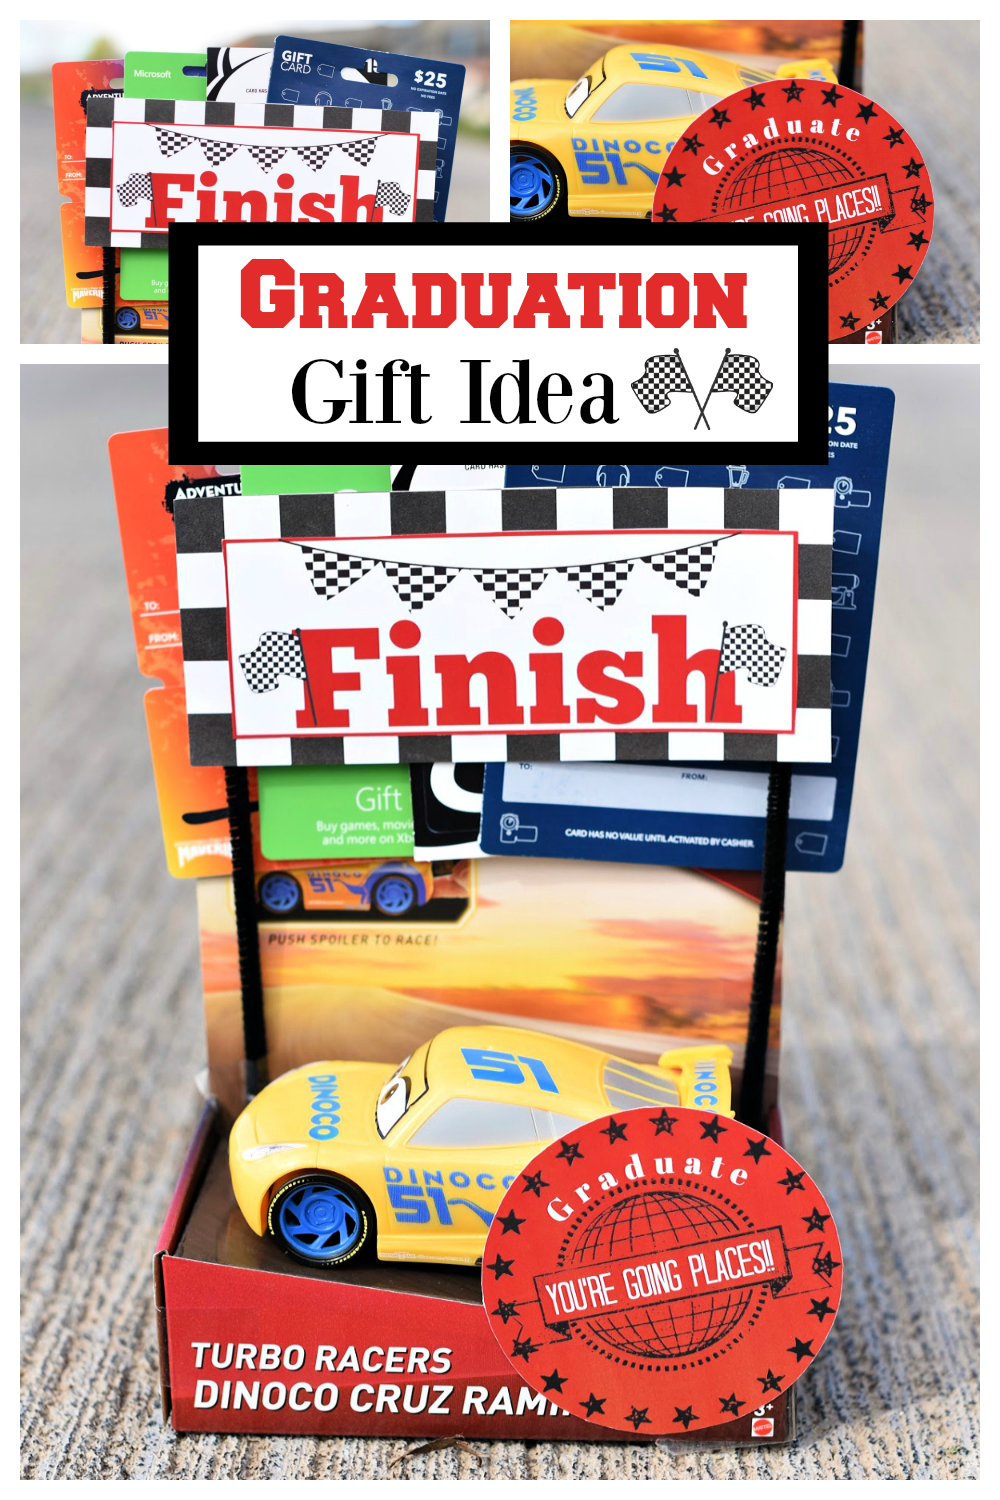 Fun and simple DIY graduation gift idea! If you have a graduate we have the perfect graduation gift. It's a fun way to give gift cards, any graduate will love it. #graduationgift #fungraduationidea #gifts #graduate 